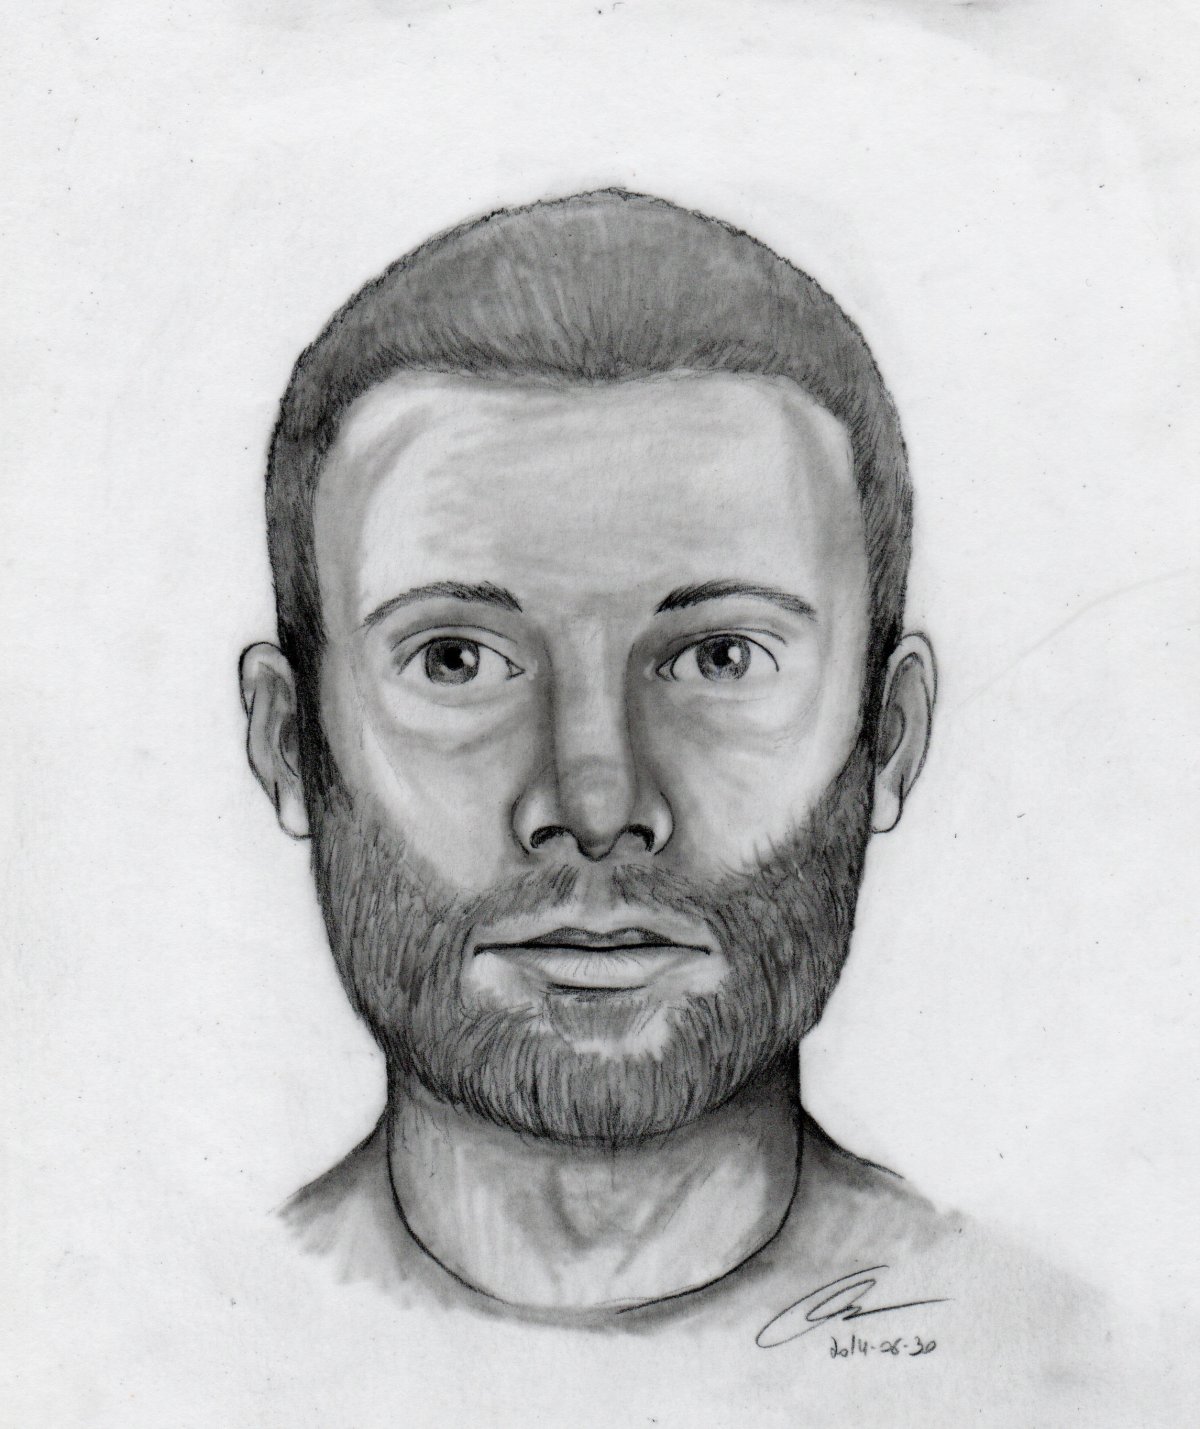 The composite sketch of a suspect accused of breaking into an Airdrie home on June 29th, 2014 and sexually assaulting a woman sleeping inside.